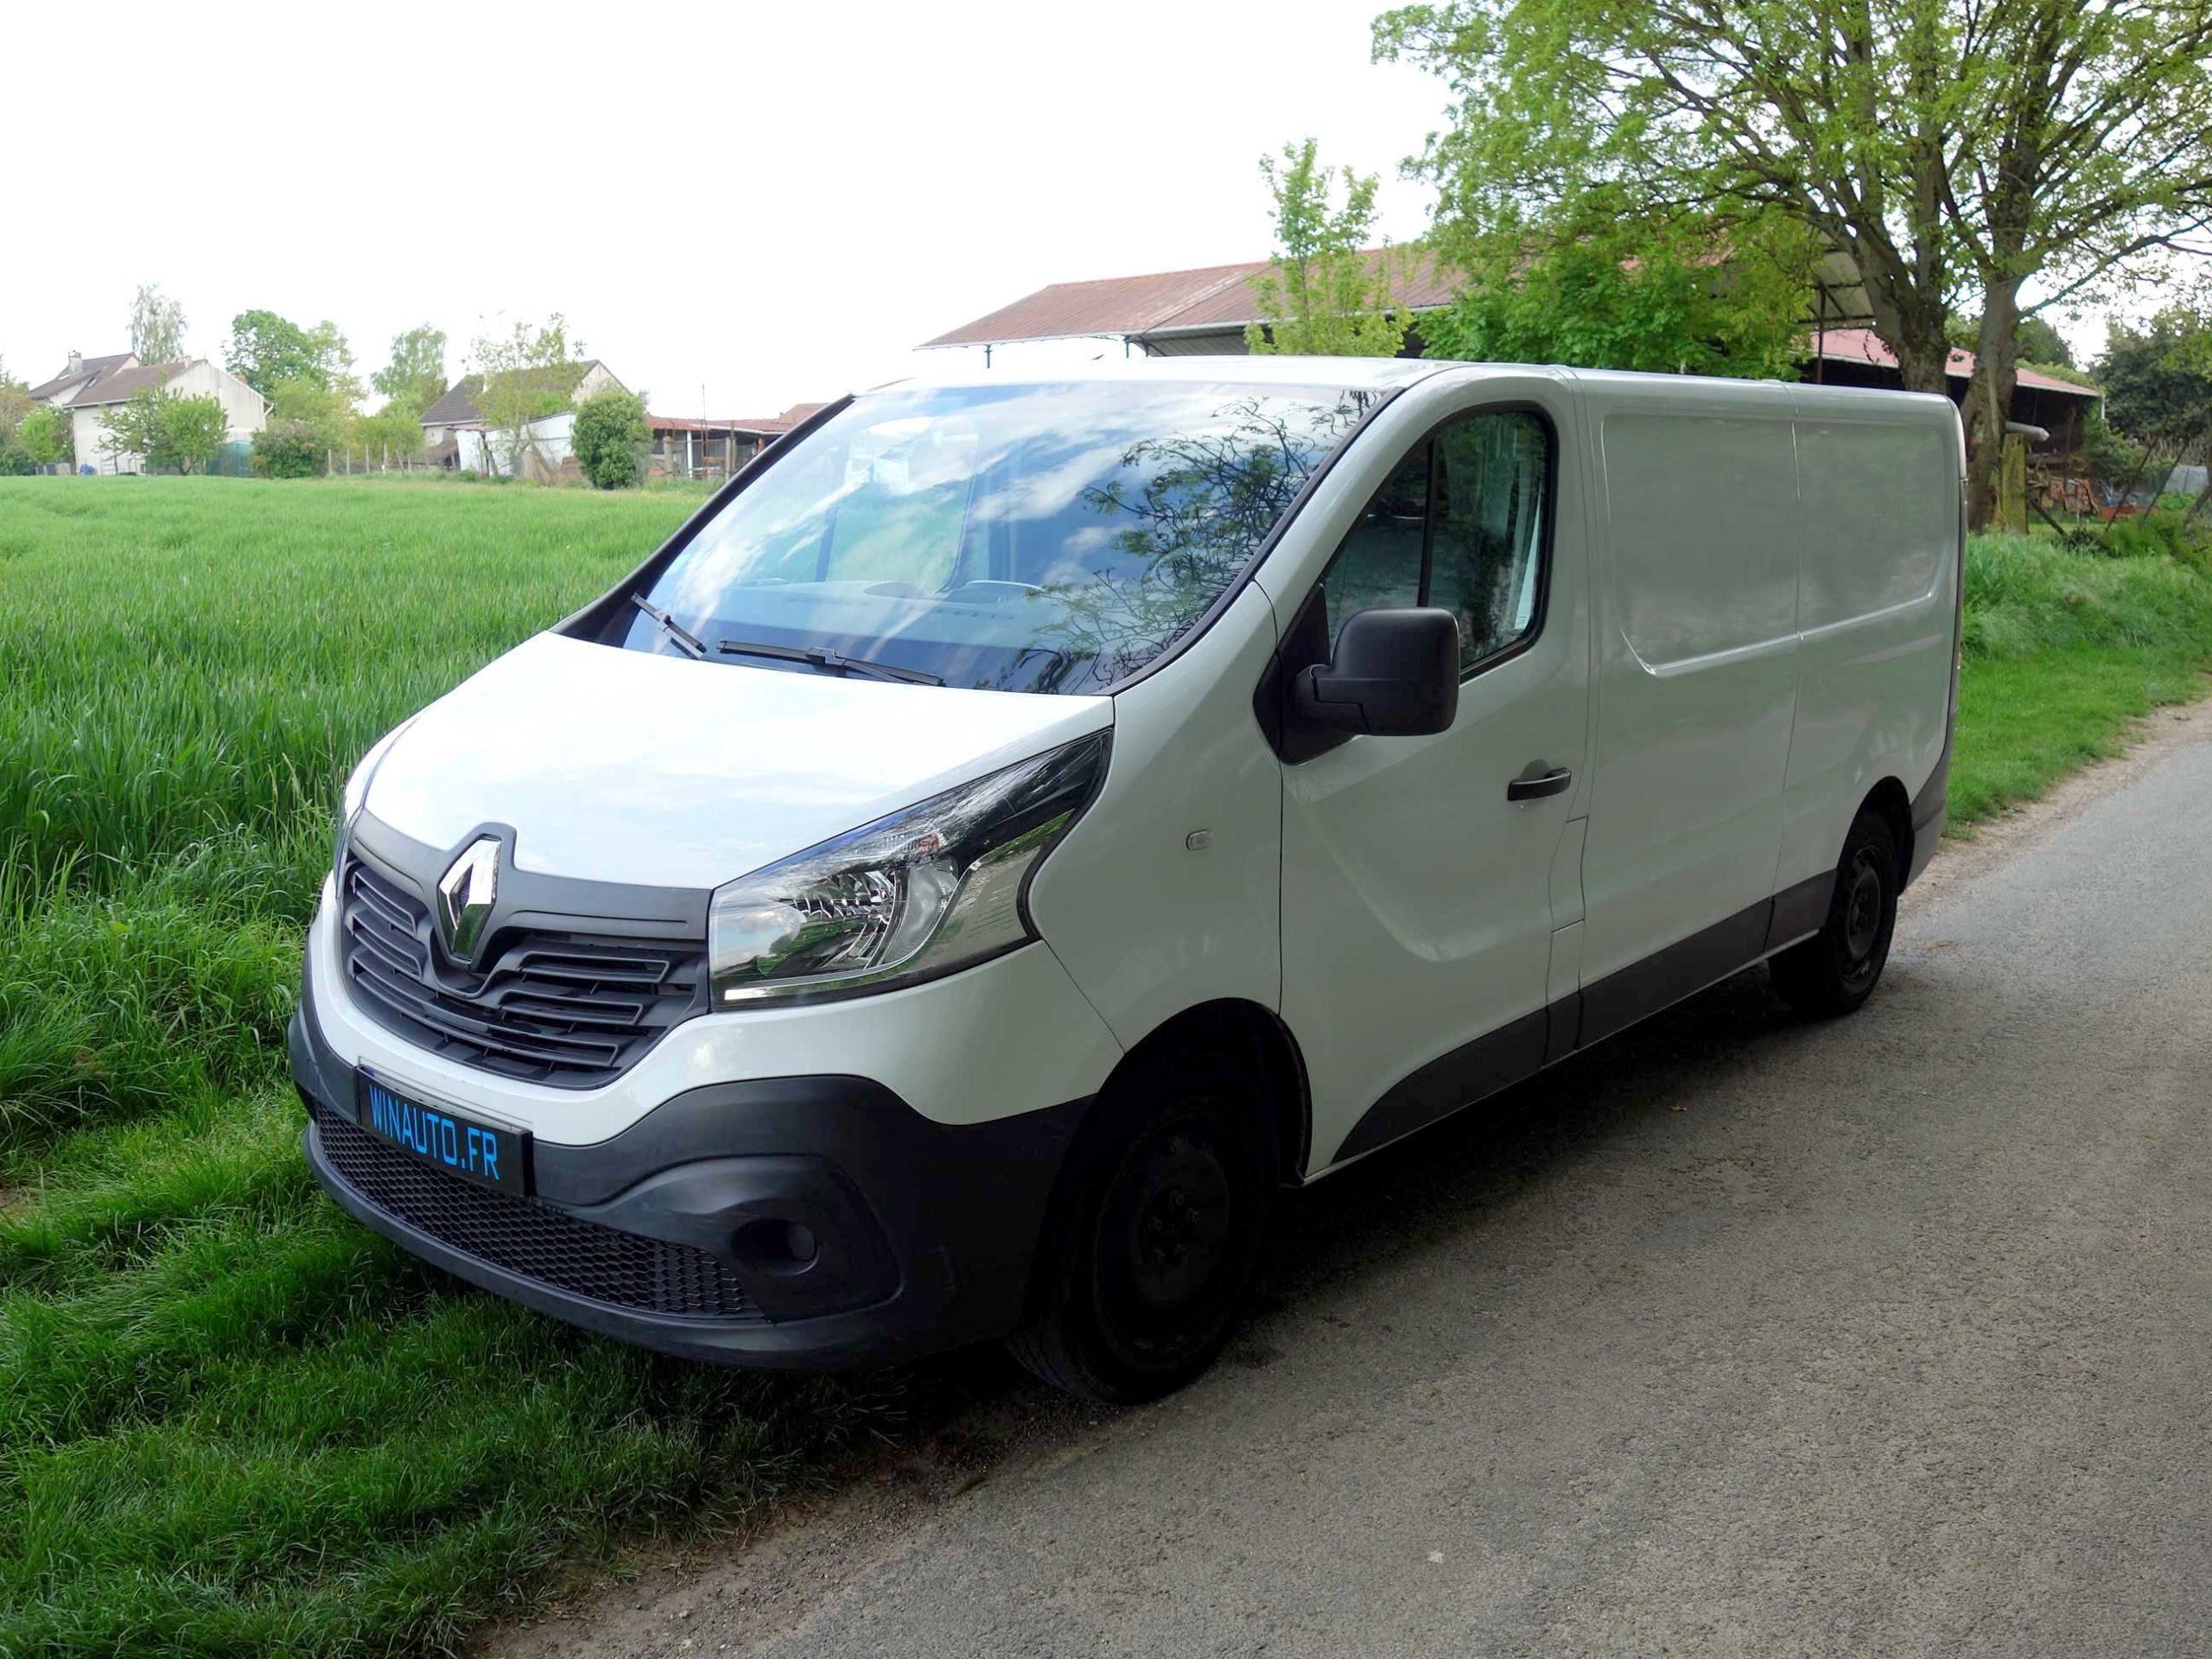 You are currently viewing Renault Trafic 3 Fourgon L2H1 1.6 dci 125 cv Grand Confort